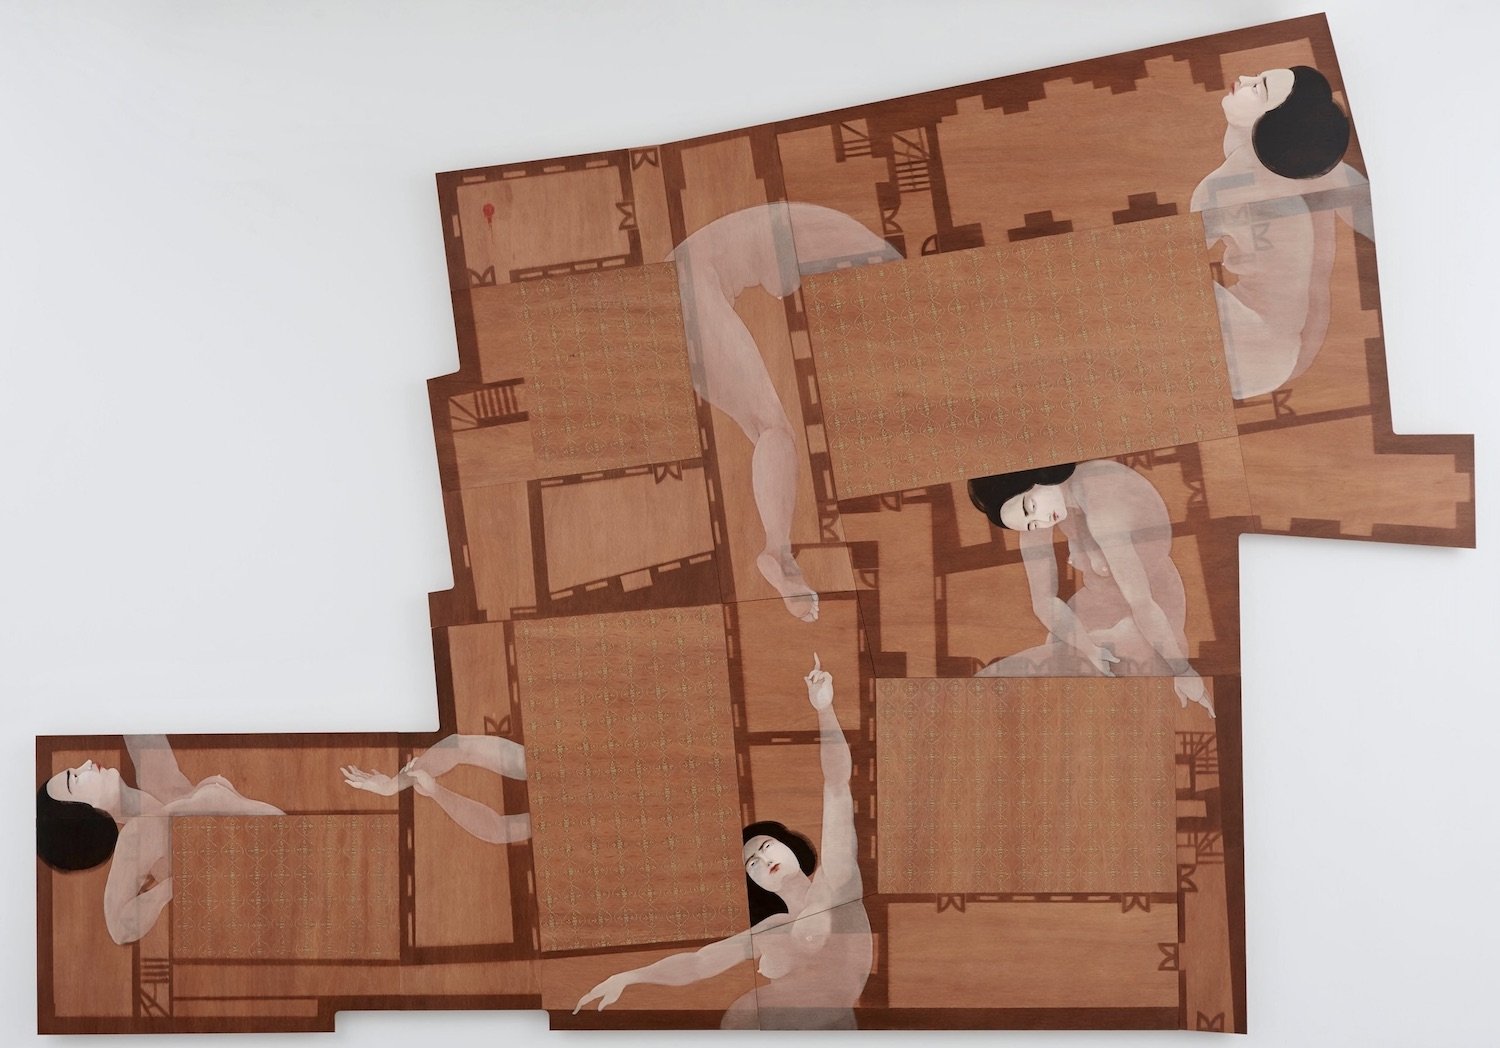 A wooden panel designed like the architectural plans of a house, wedged between the rooms are ghostly figures of women, some of which are incomplete